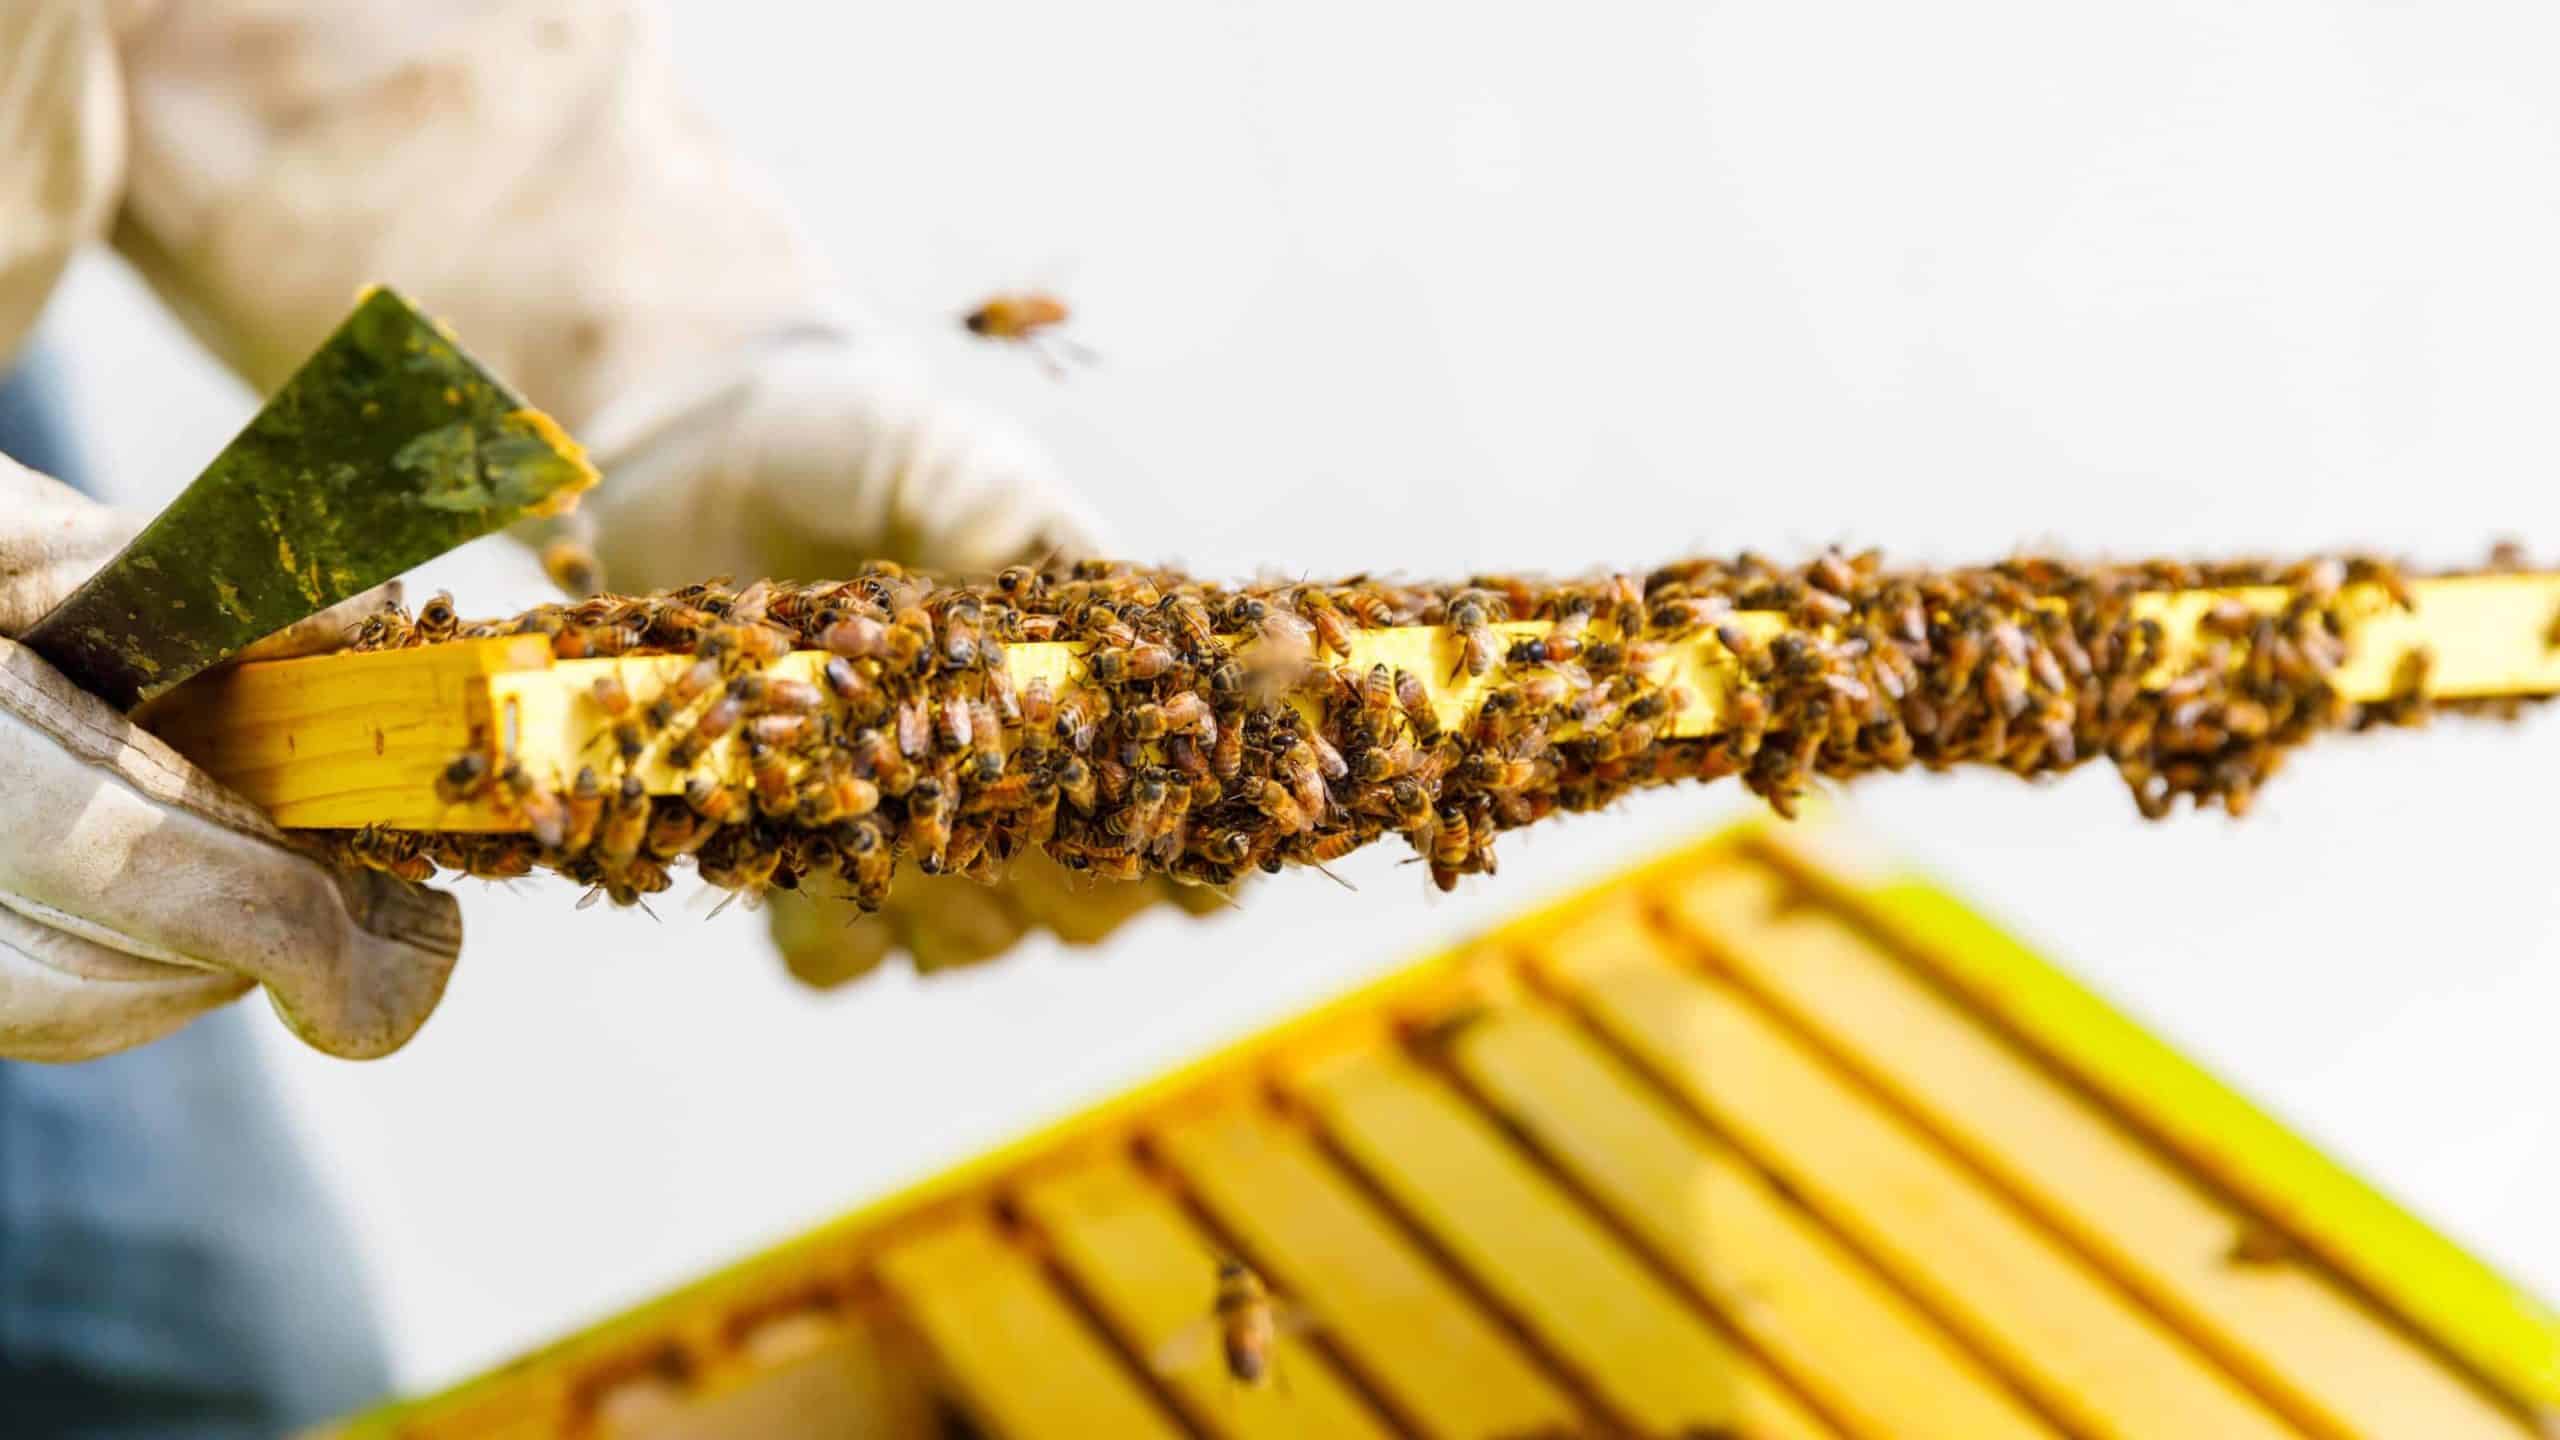 Bees congregate on a honeycomb from their rooftop hive at the museum.